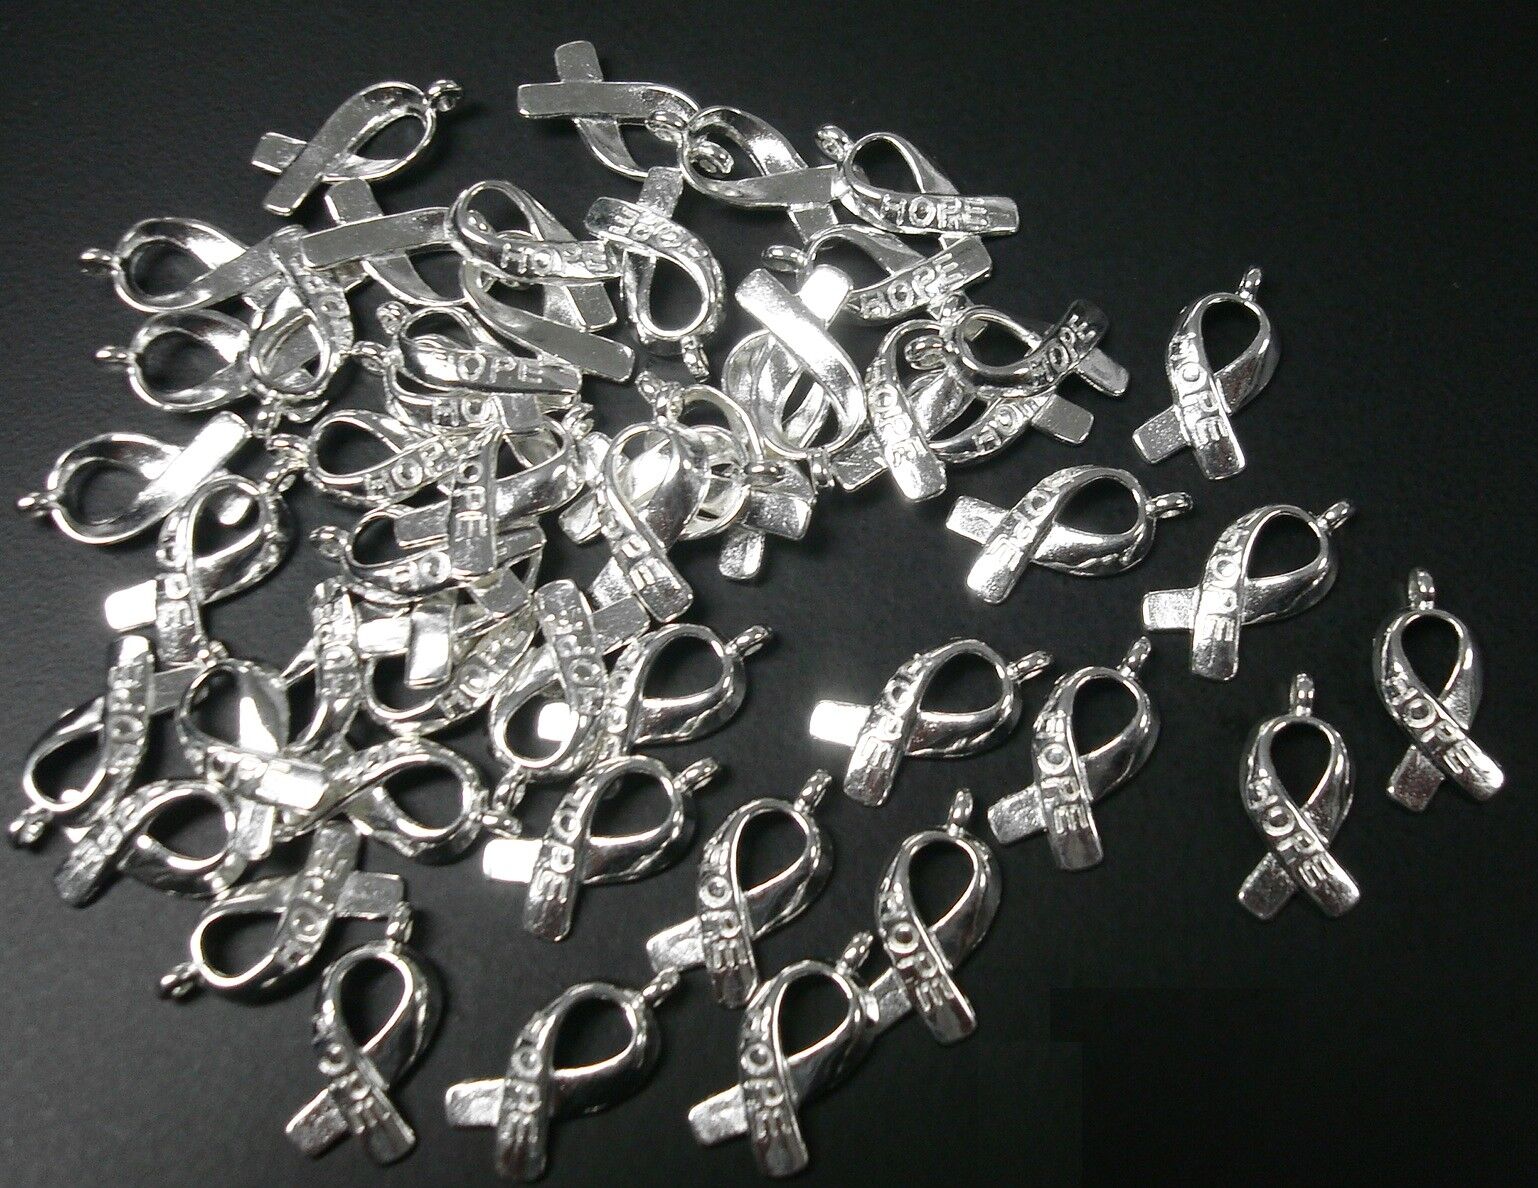 50 Cancer awareness hope ribbon charms bright silver plt zinc findings CFP113 Charms CFP113